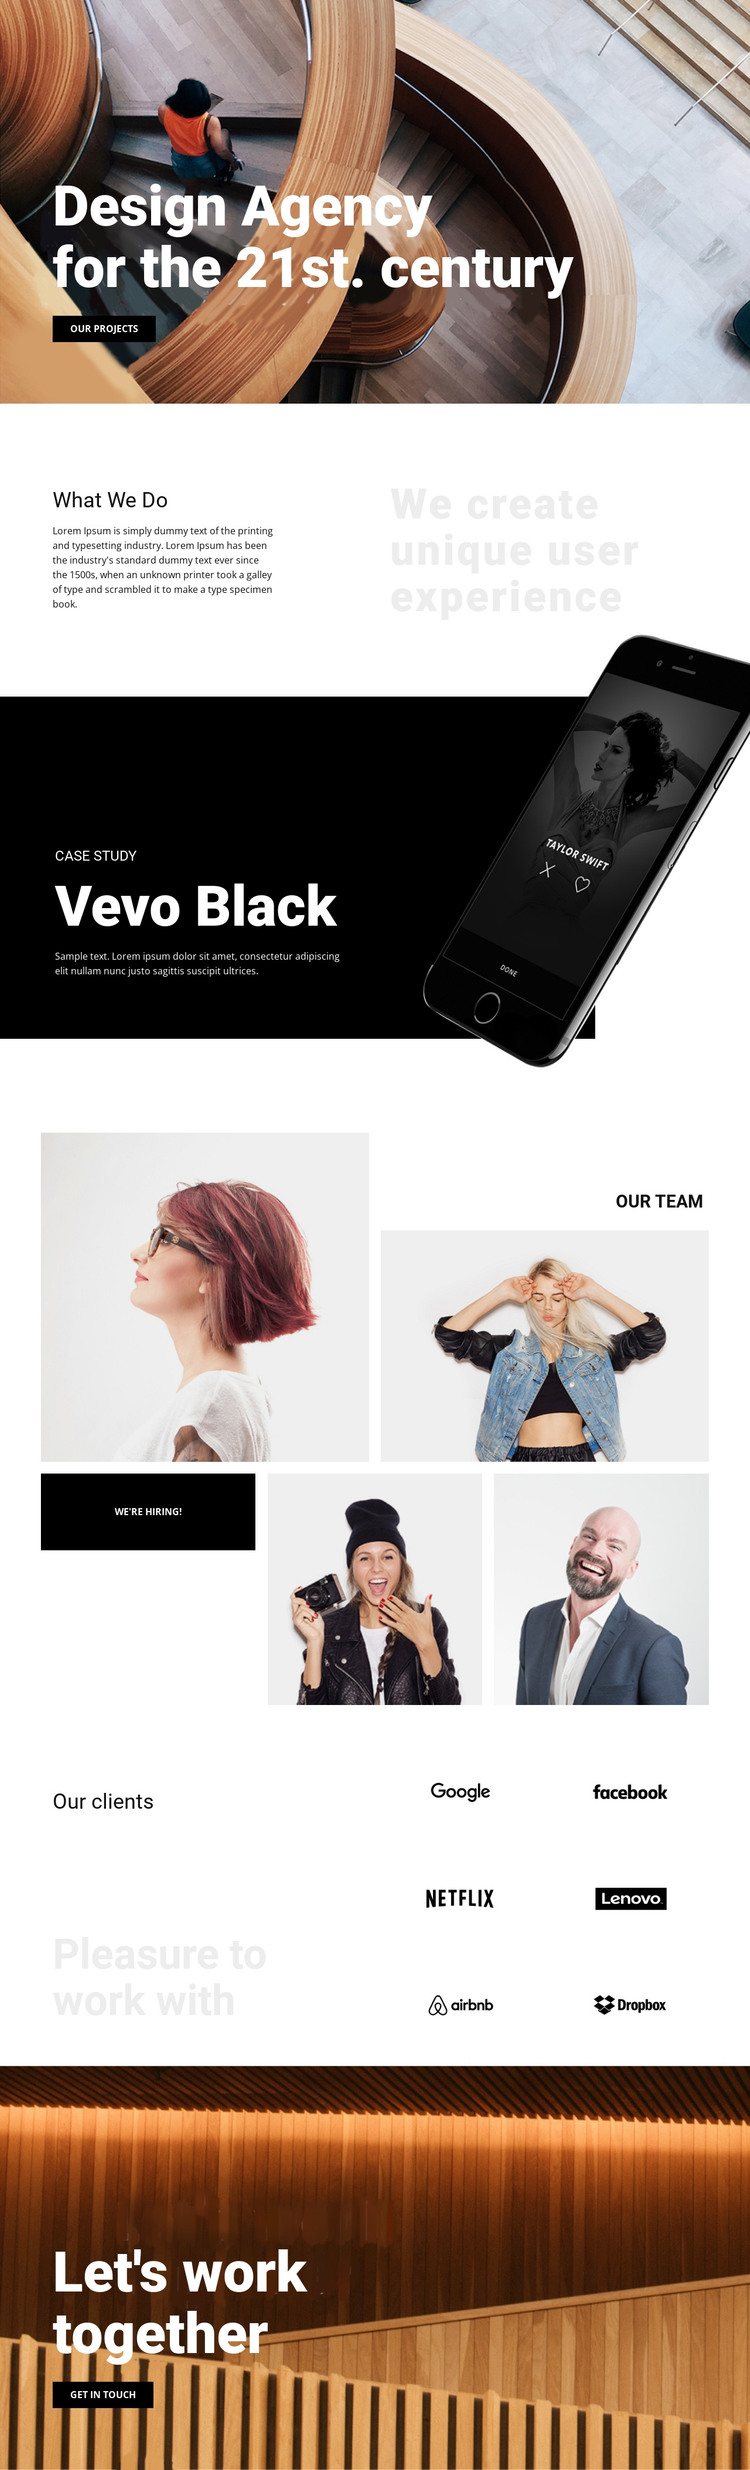 Our work is your success HTML Template